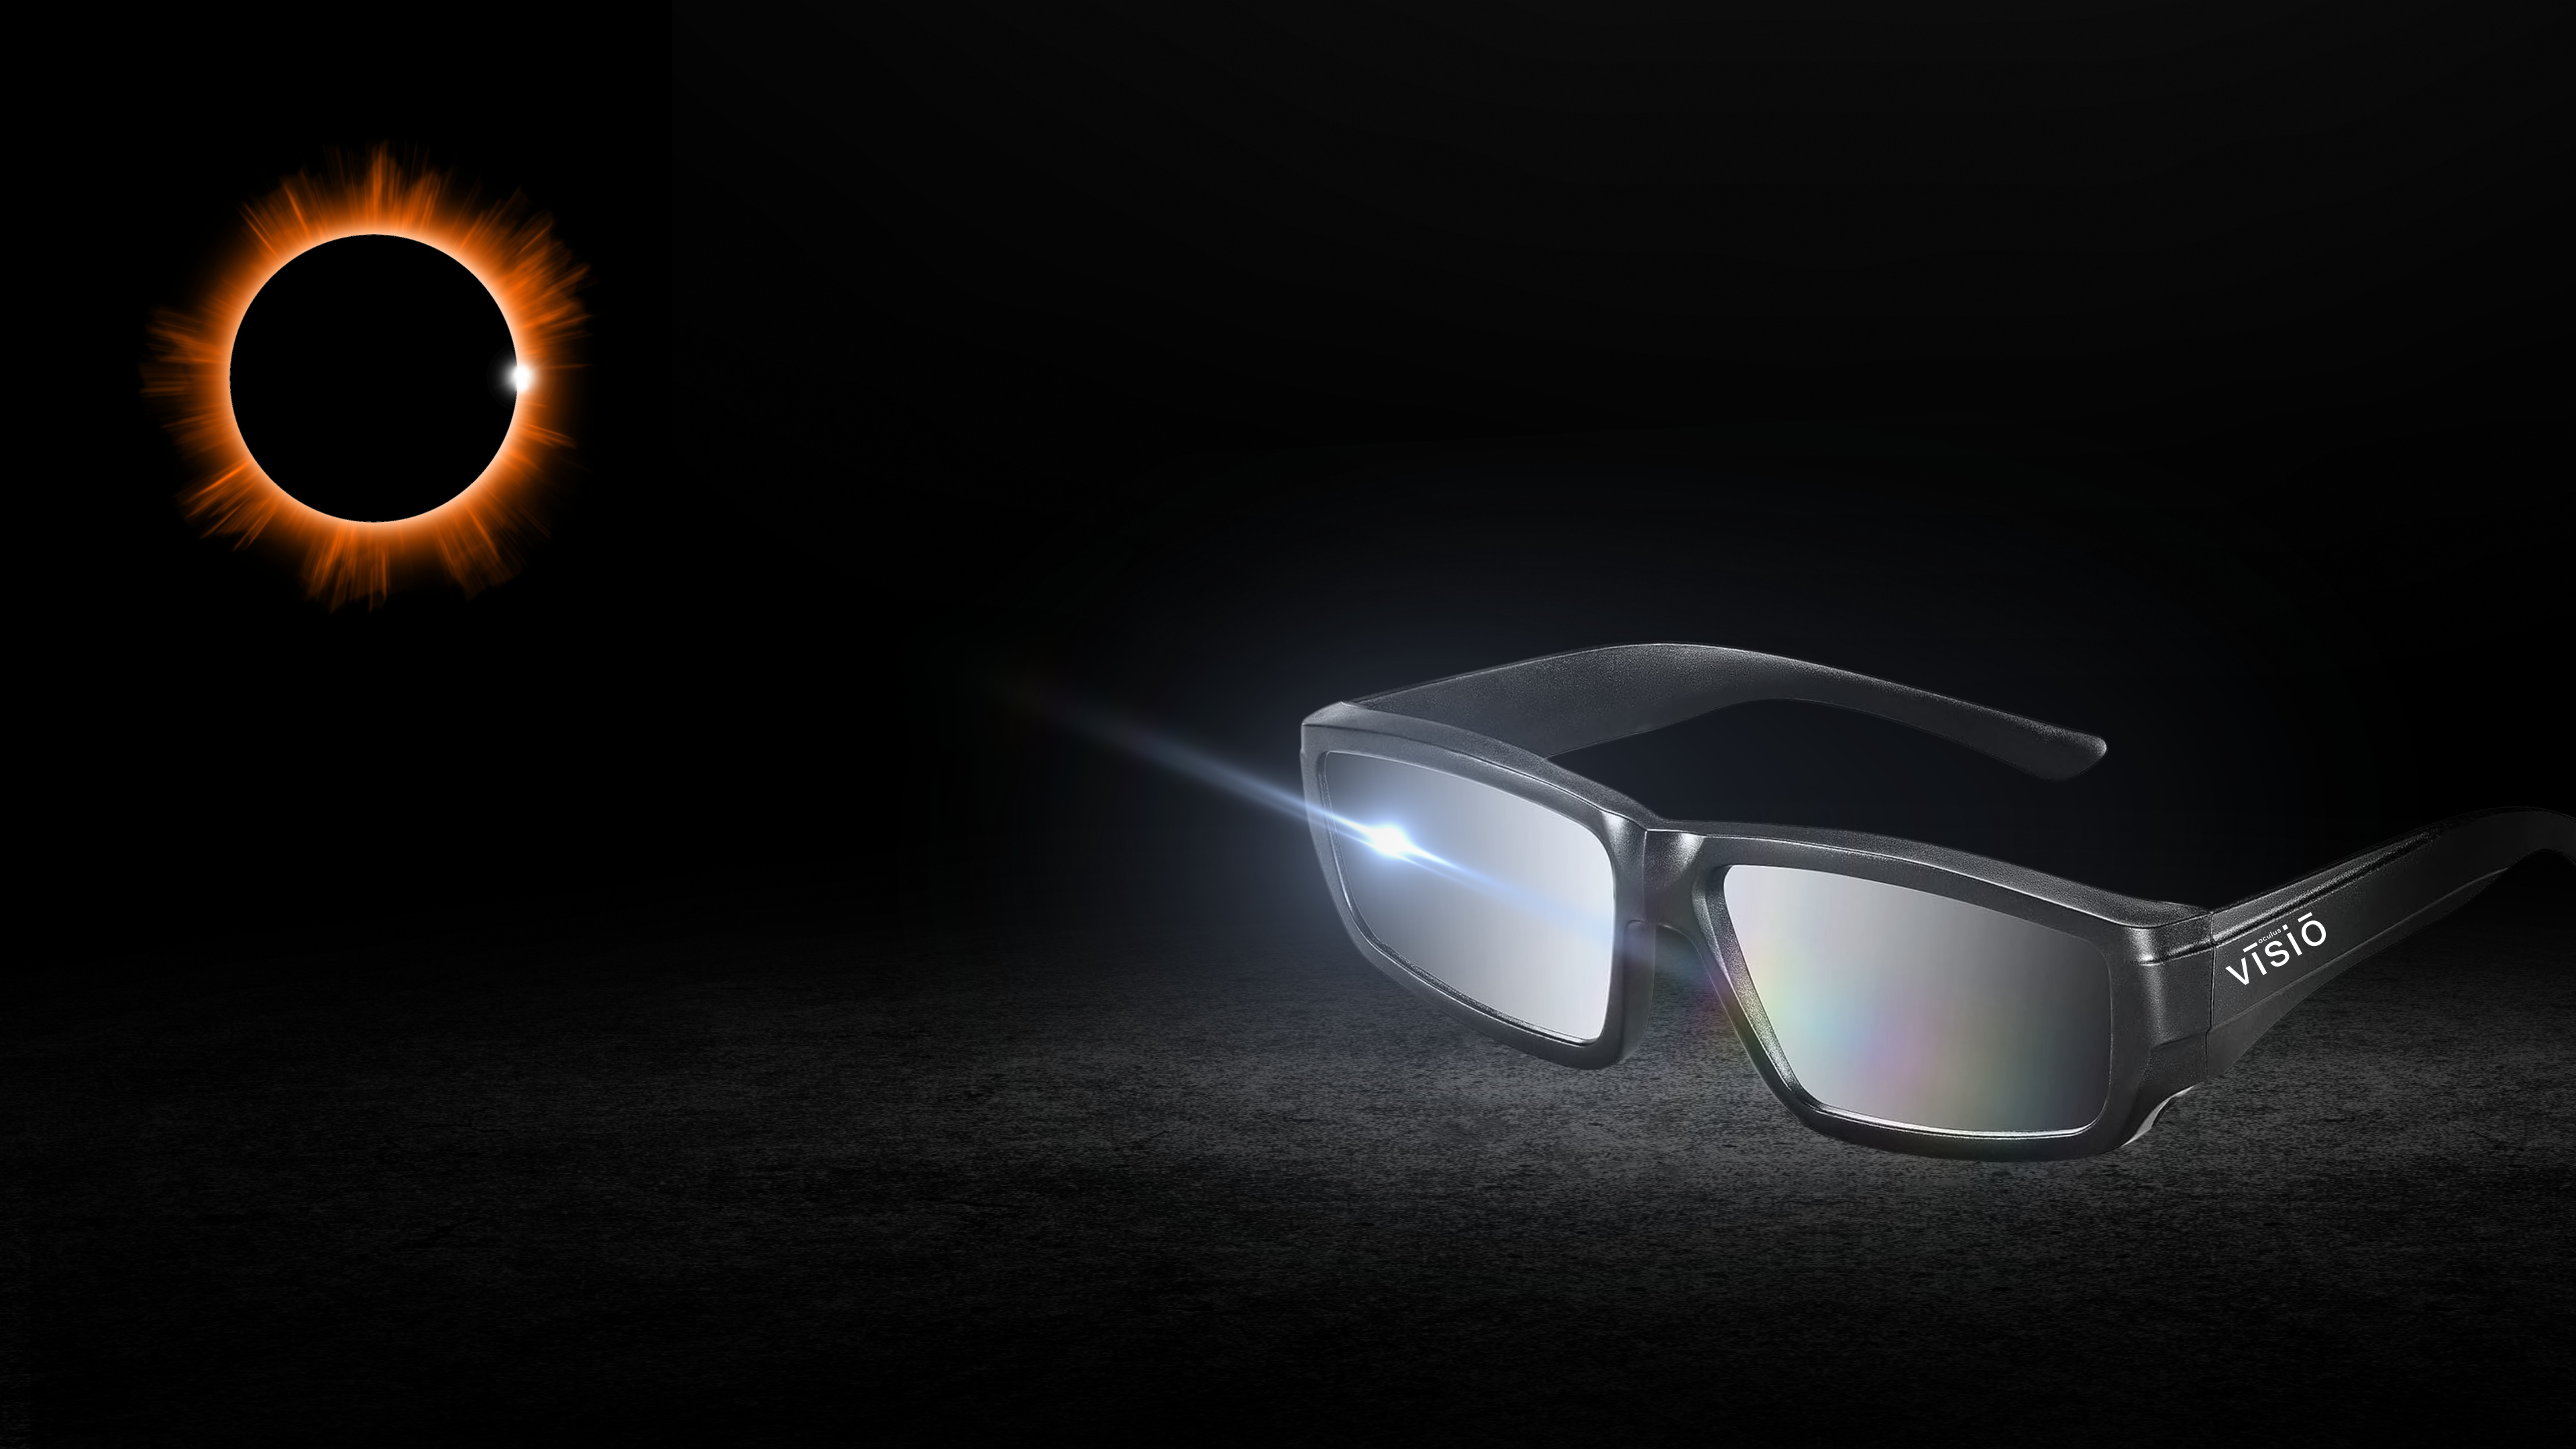 Witness the Total Solar Eclipse on April 8th, 2024, with solar eclipse glasses.